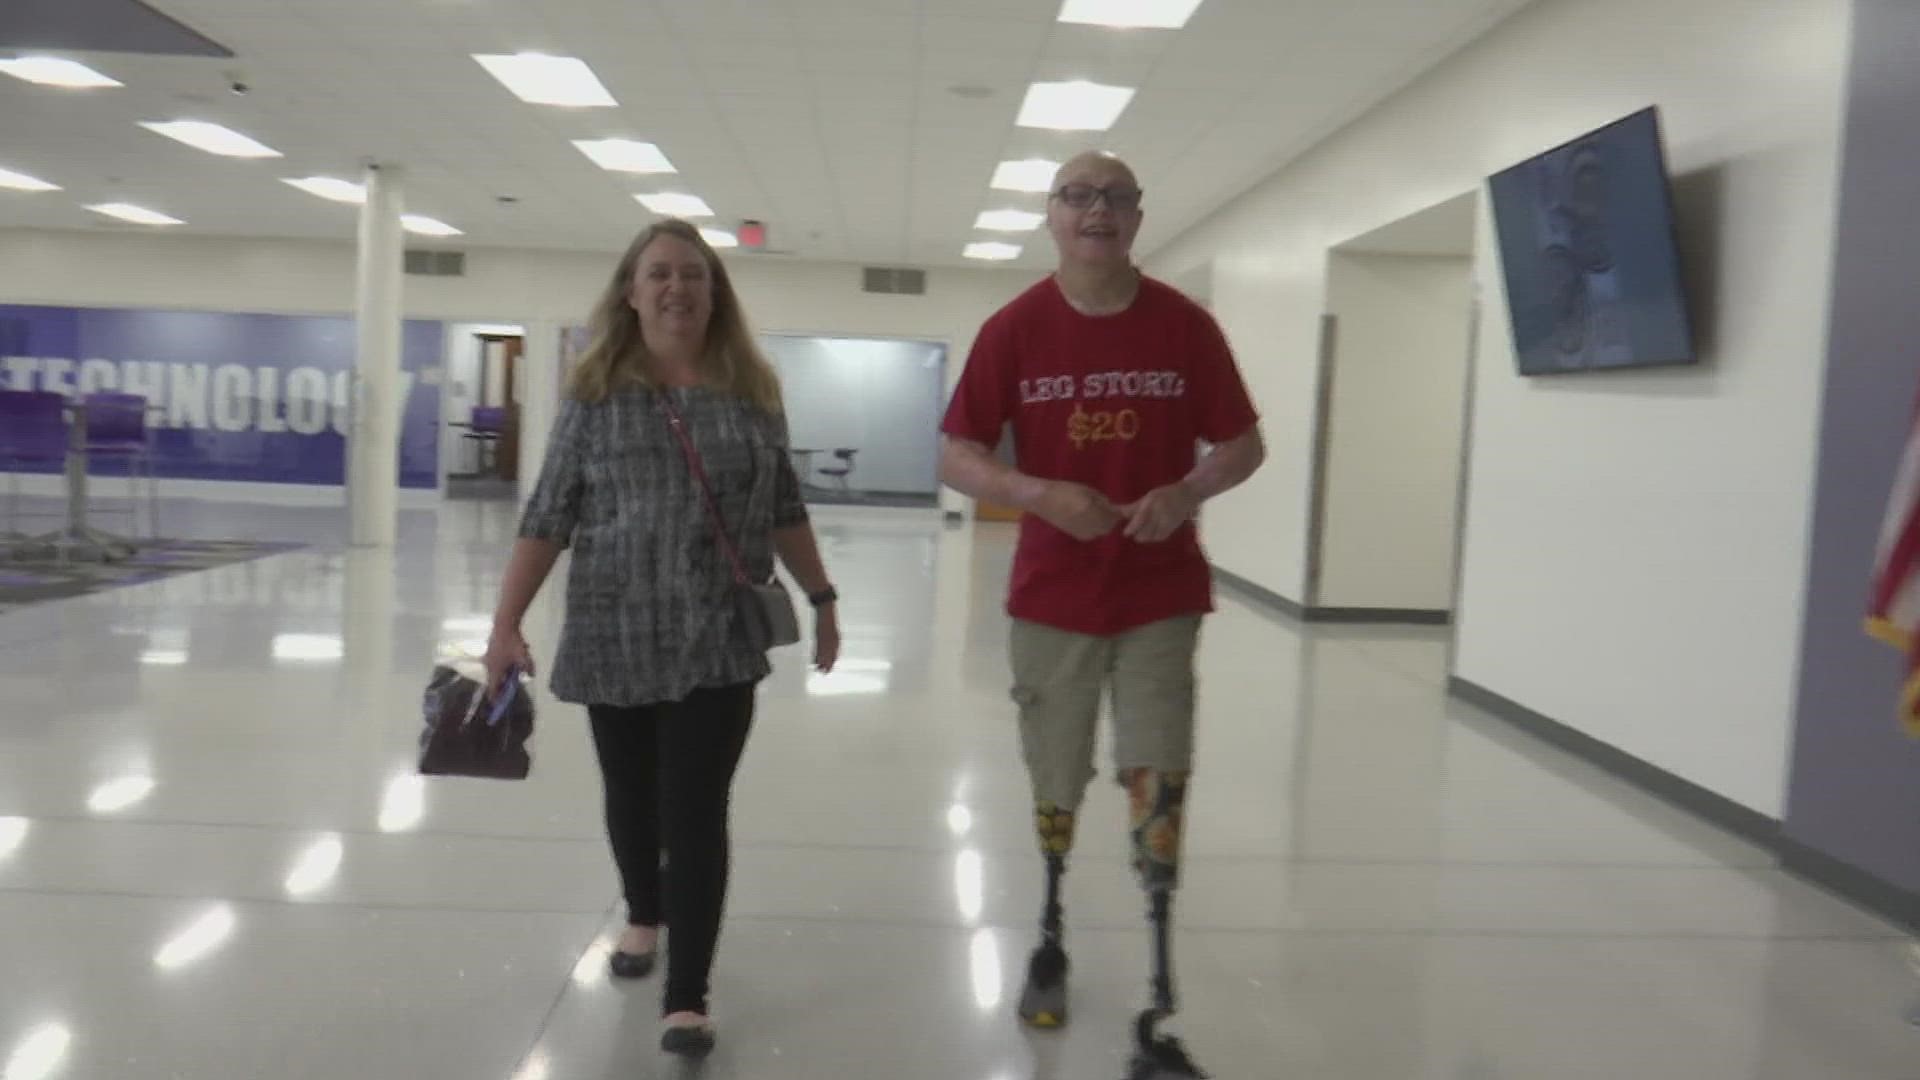 Owen Mahan continues to defy odds, inspire others and help those facing similar struggles.